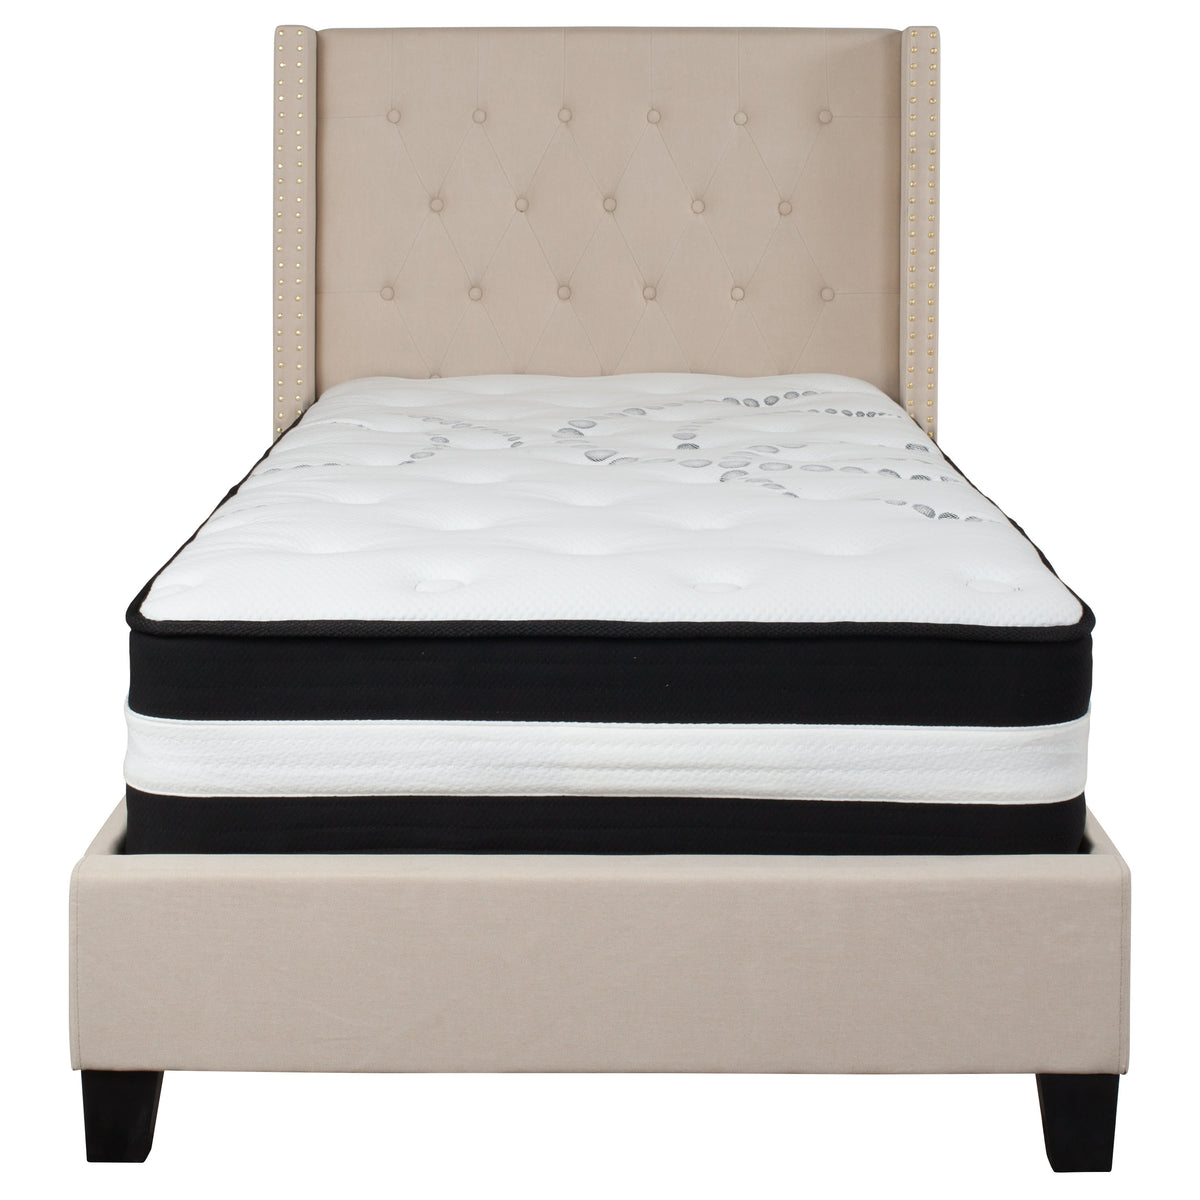 Beige,Twin |#| Twin Size Tufted Beige Fabric Platform Bed with Accent Nail Trim & Mattress